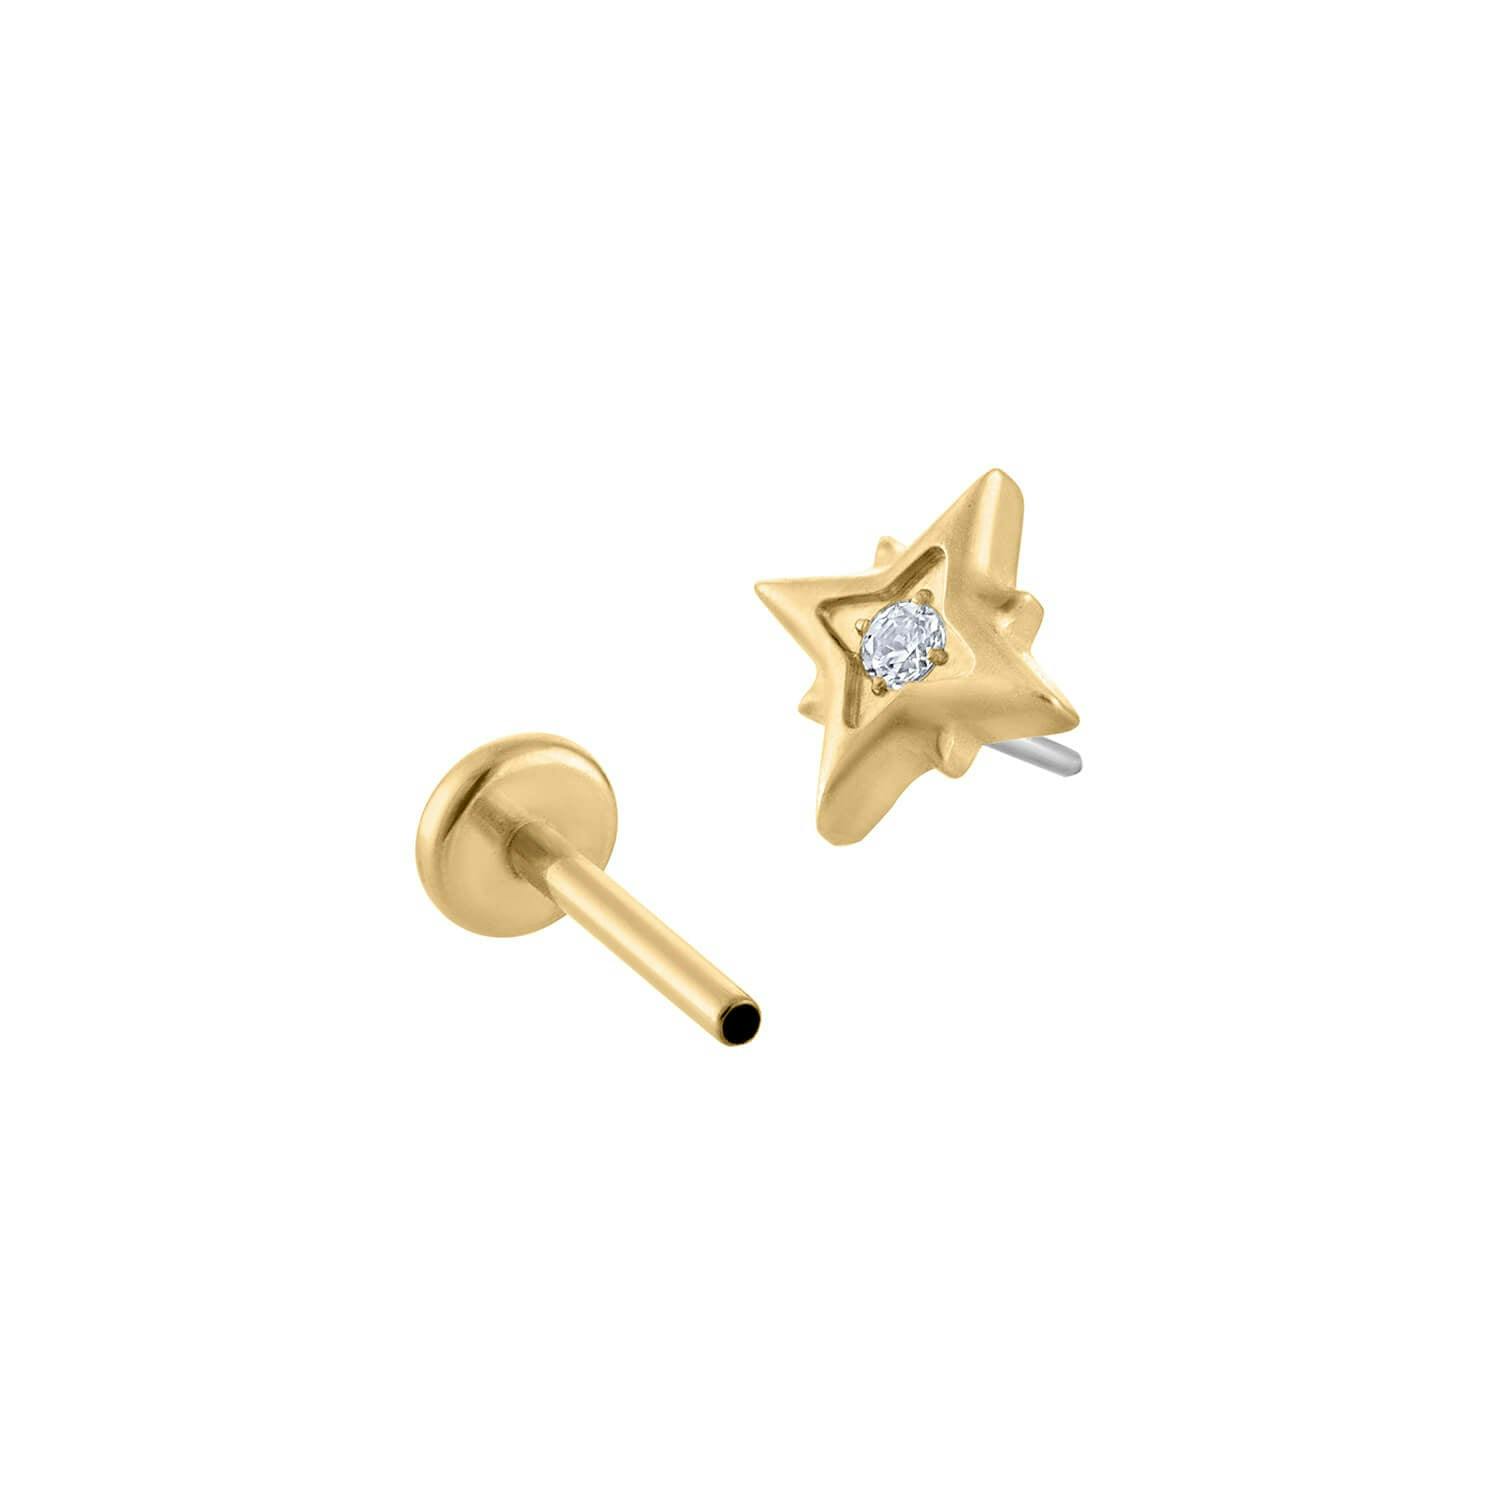 North Star Nap Earrings in Gold